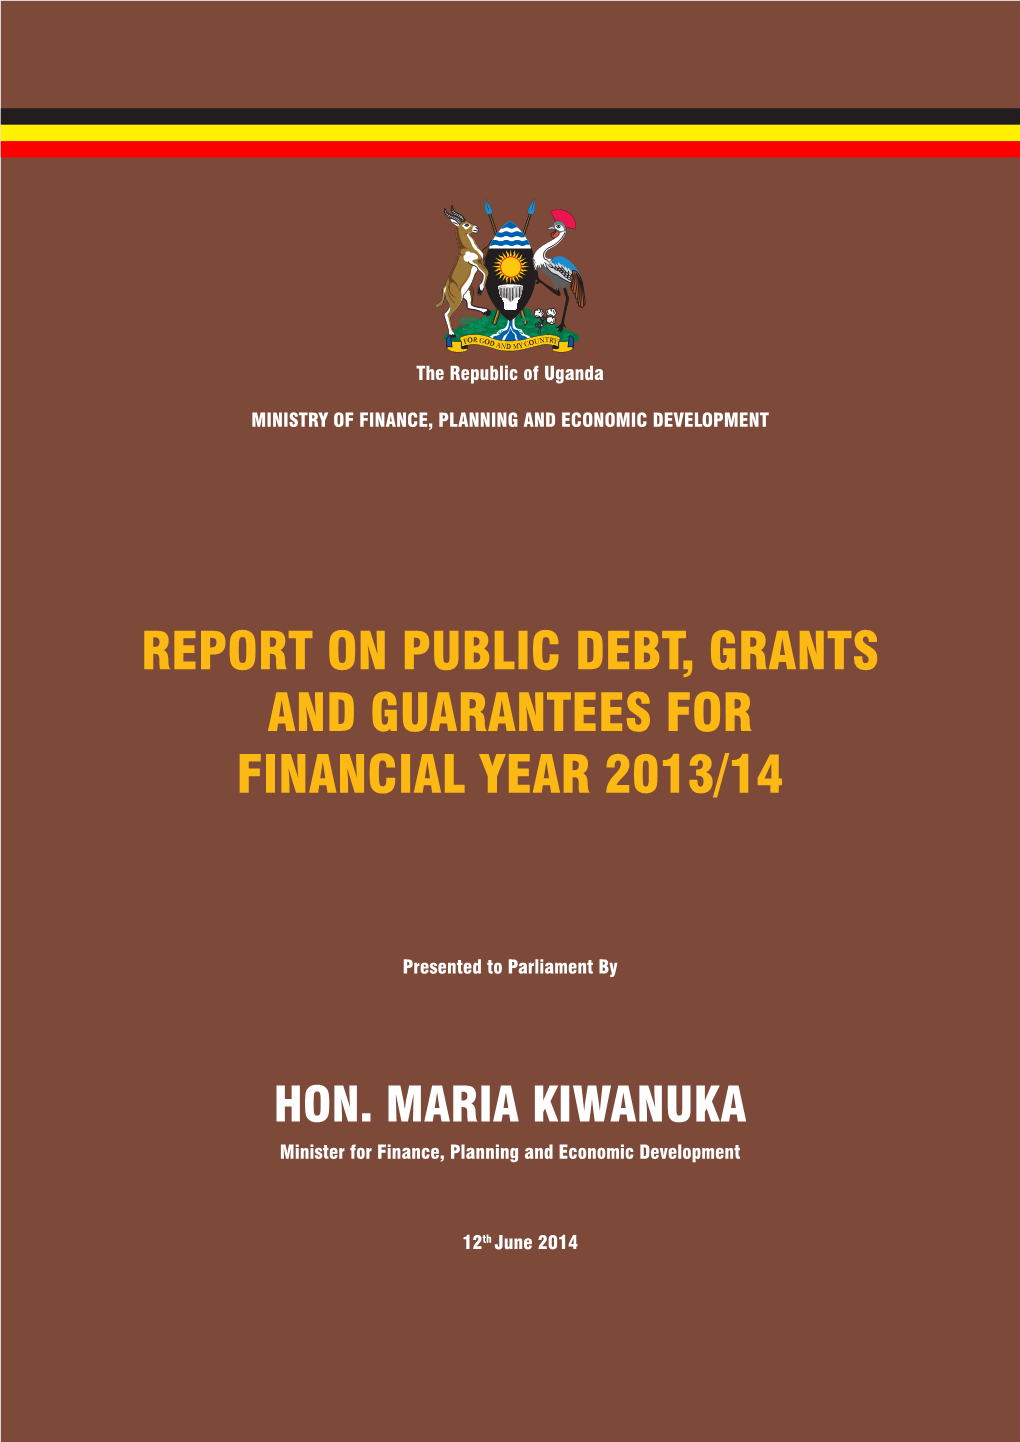 Report on Public Debt, Grants and Guarantees for Financial Year 2013/14